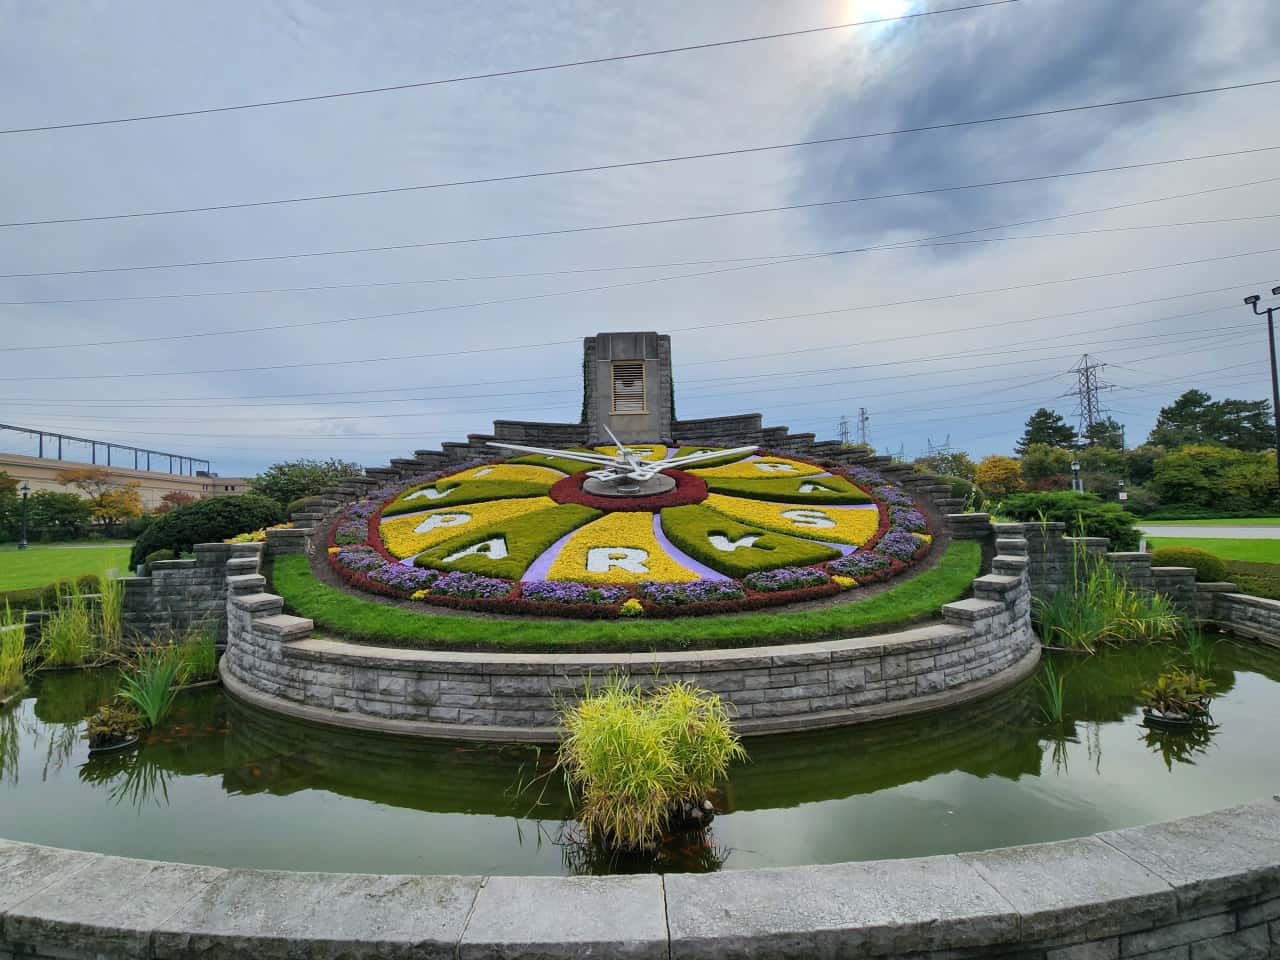 Floral Clock Niagara Falls Ontario  - This neat roadside attraction changes every year. So if you've seen it before, it will look different each year. You can even go around back and explore the history and inner workings of this cool oversized clock in Niagara Falls. 